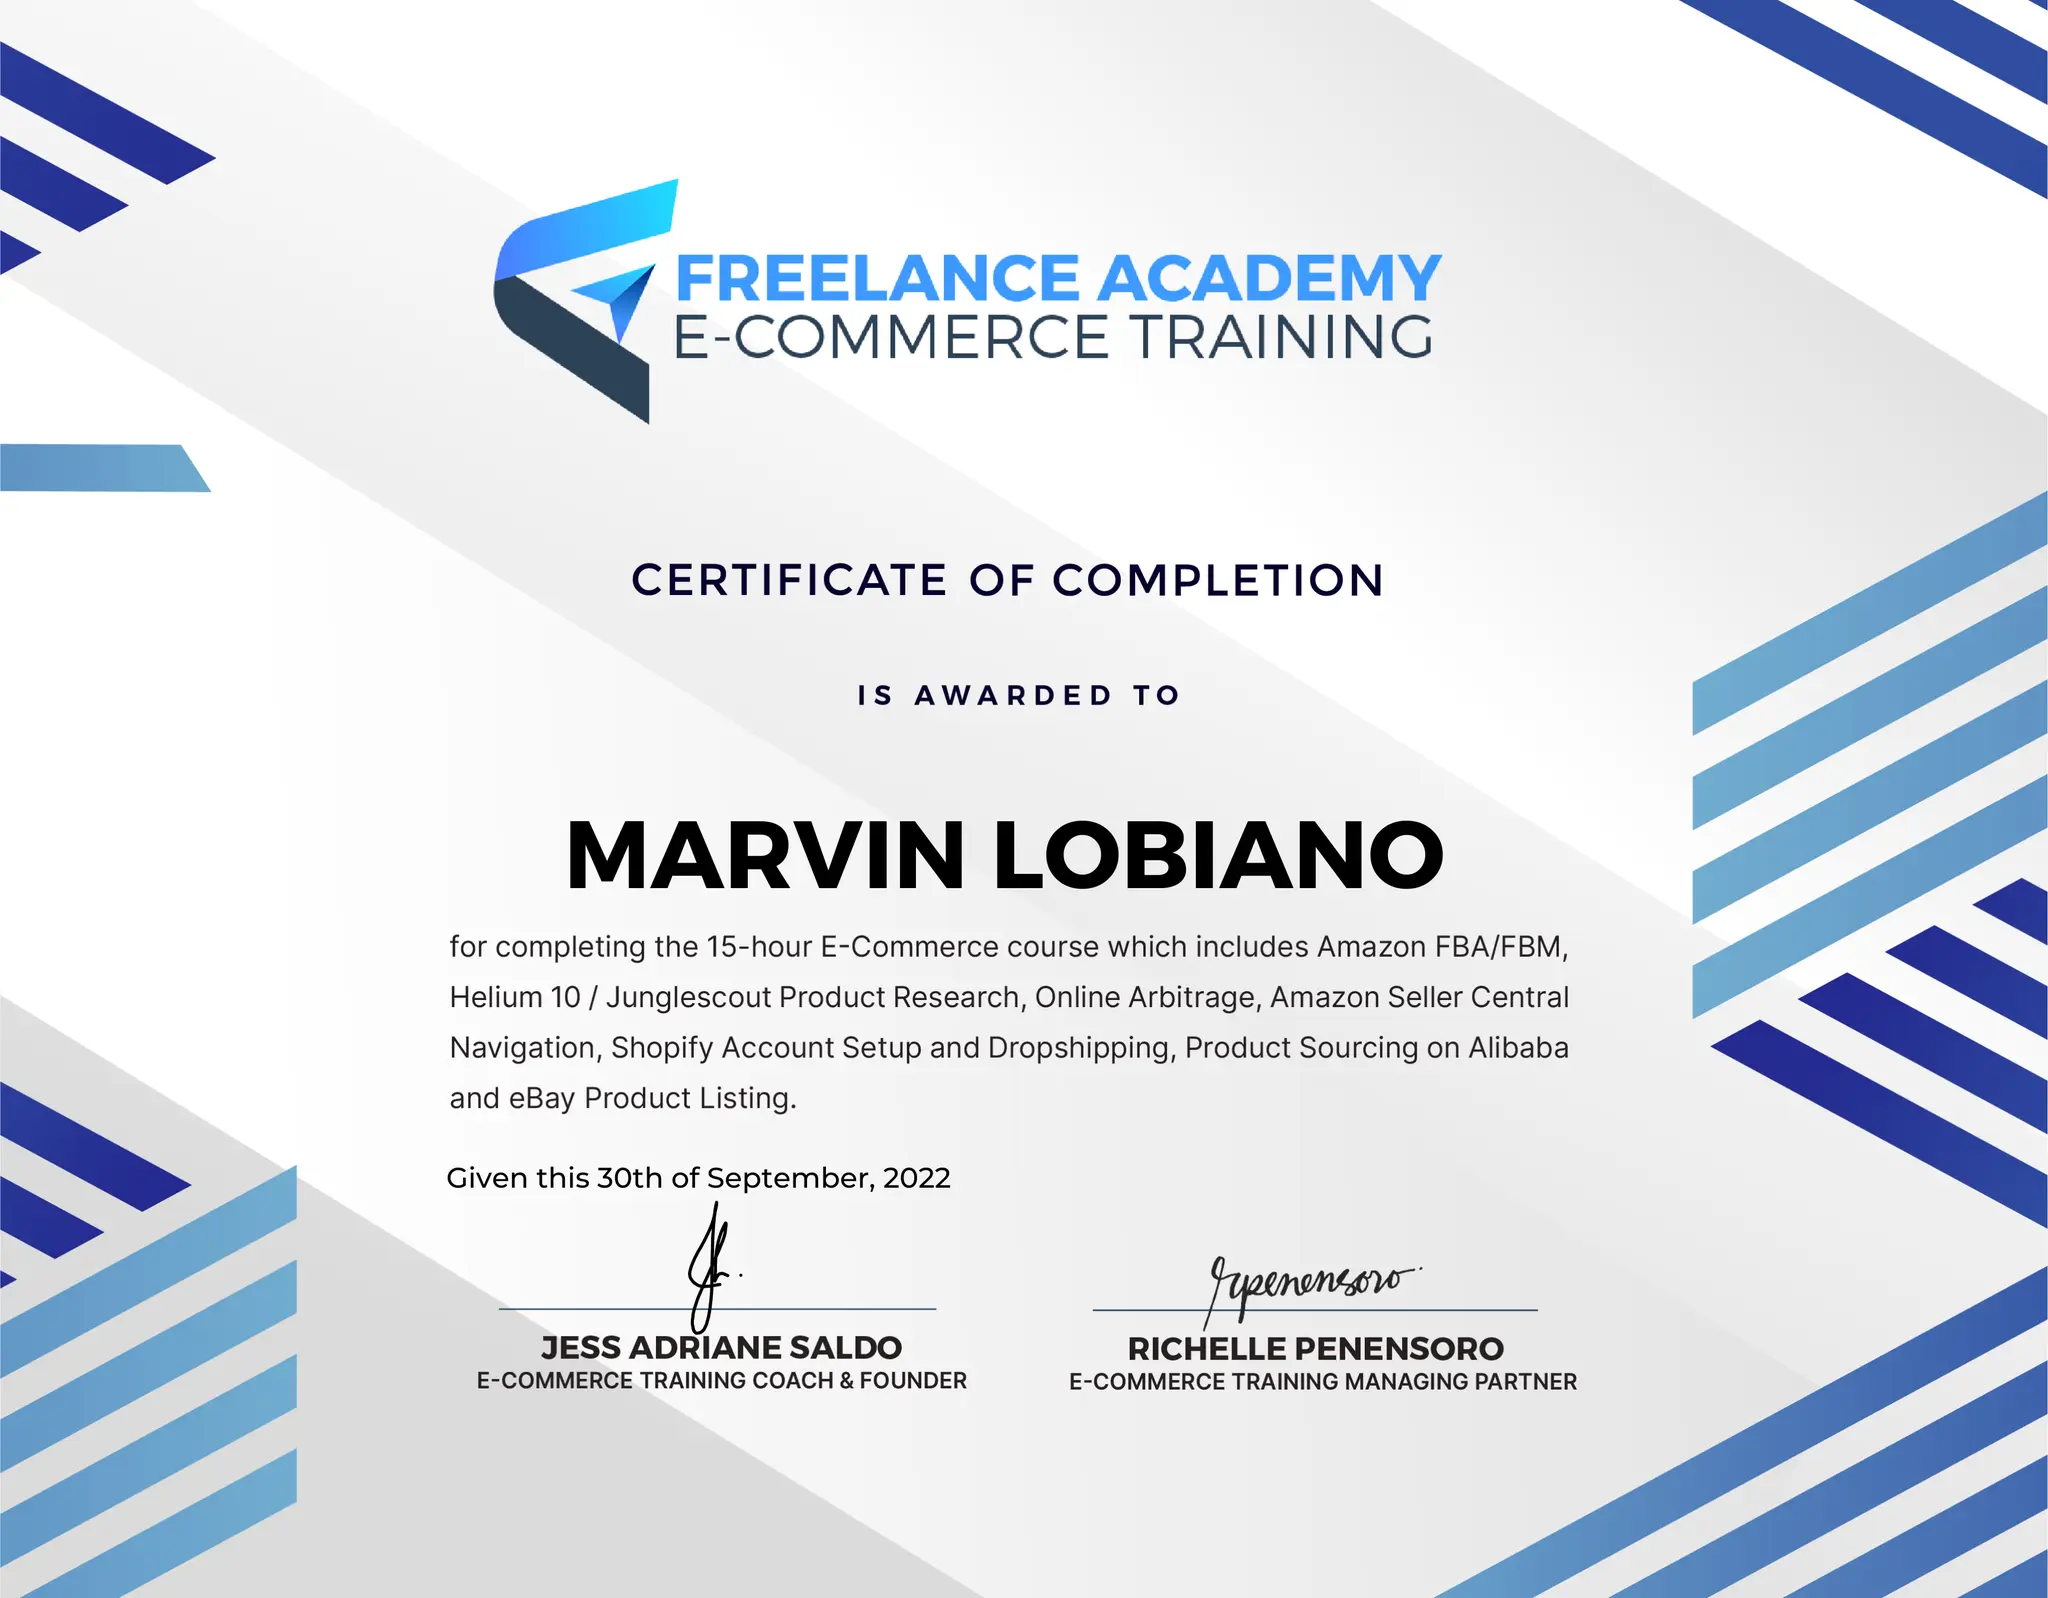 Marvin Lobiano has a E-commerce Certificate